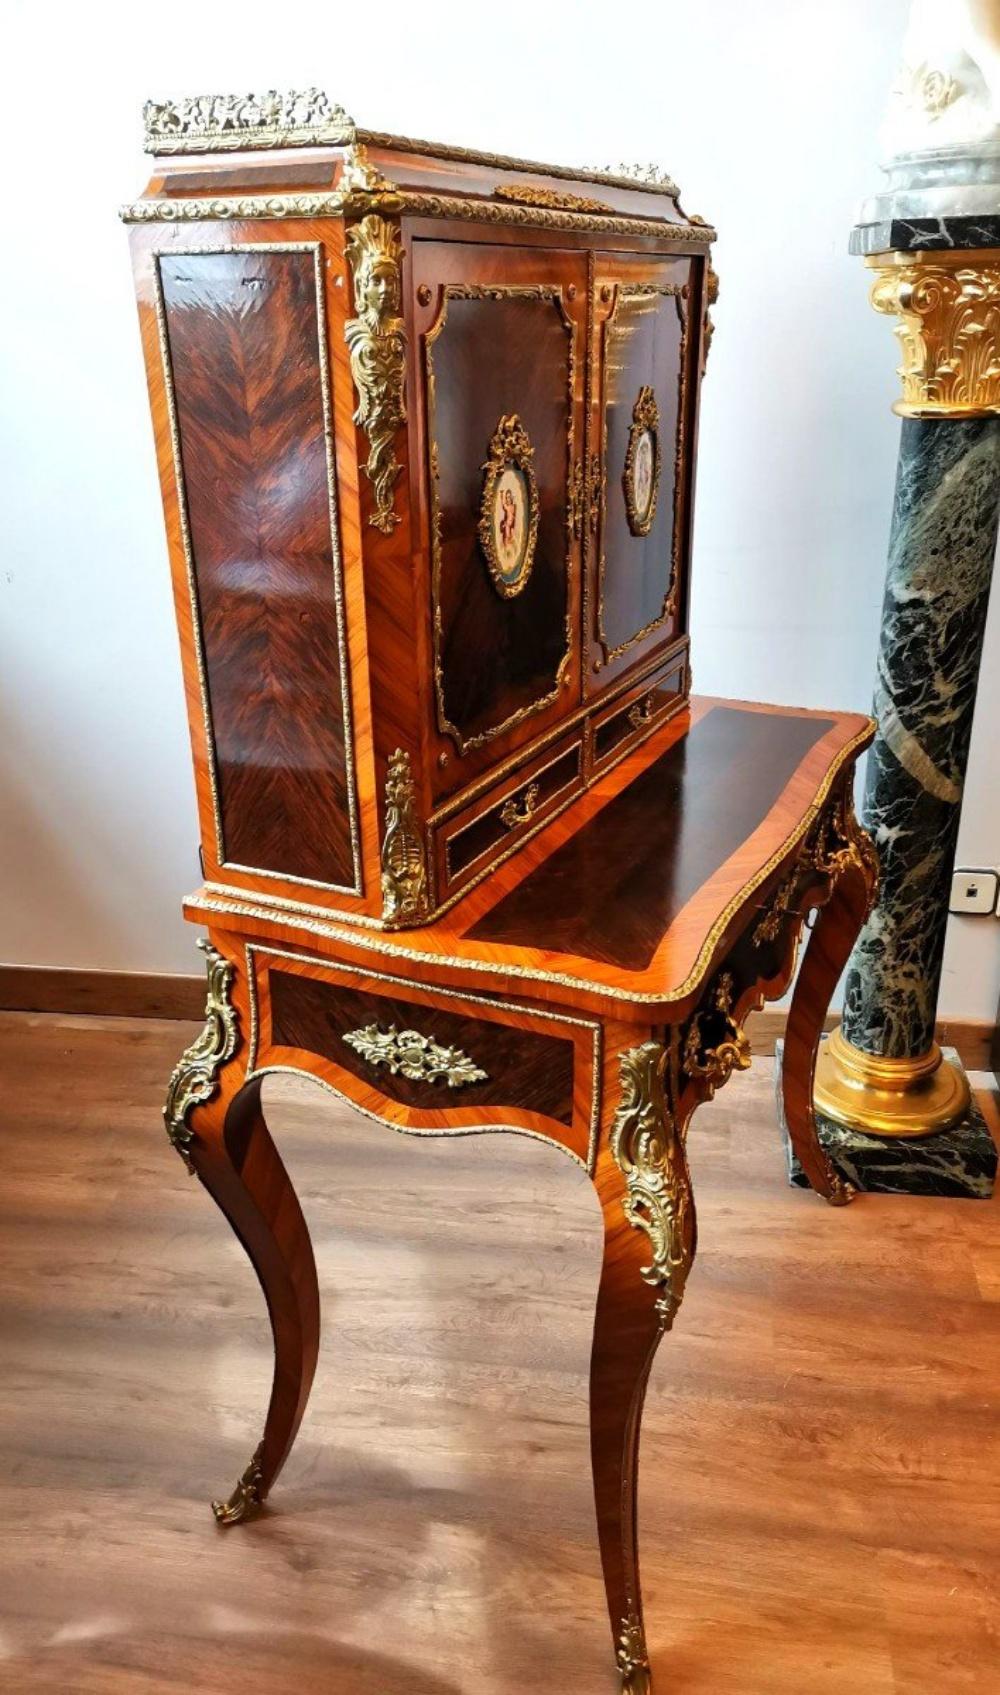 Bonheur Du Jour Desk Napoleon III Period 19th Century Wood Hand Crafted For Sale 6